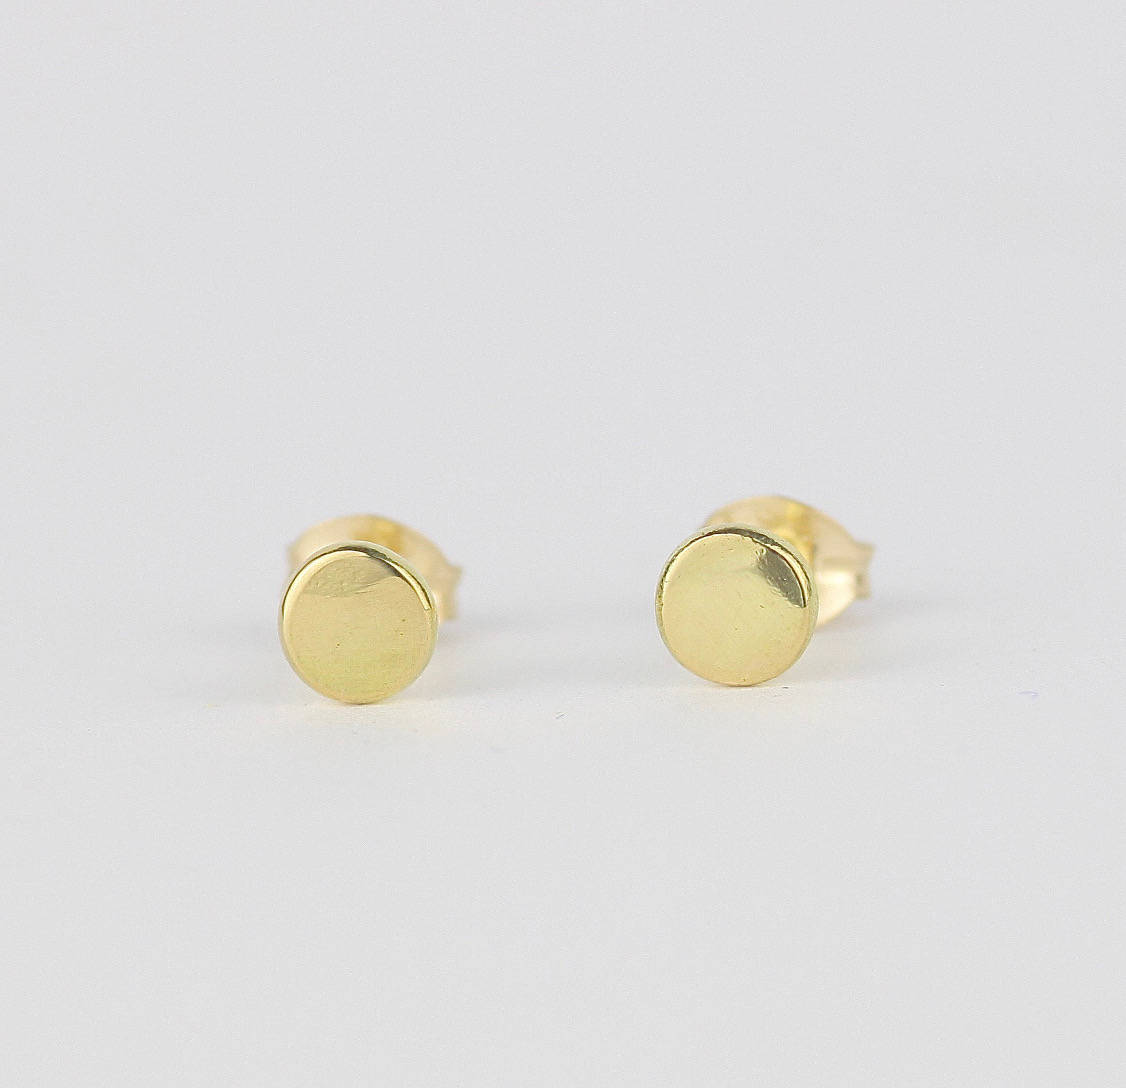 Dainty 18ct Gold Stud Earrings. Minimal Delicate Studs. Small | Etsy